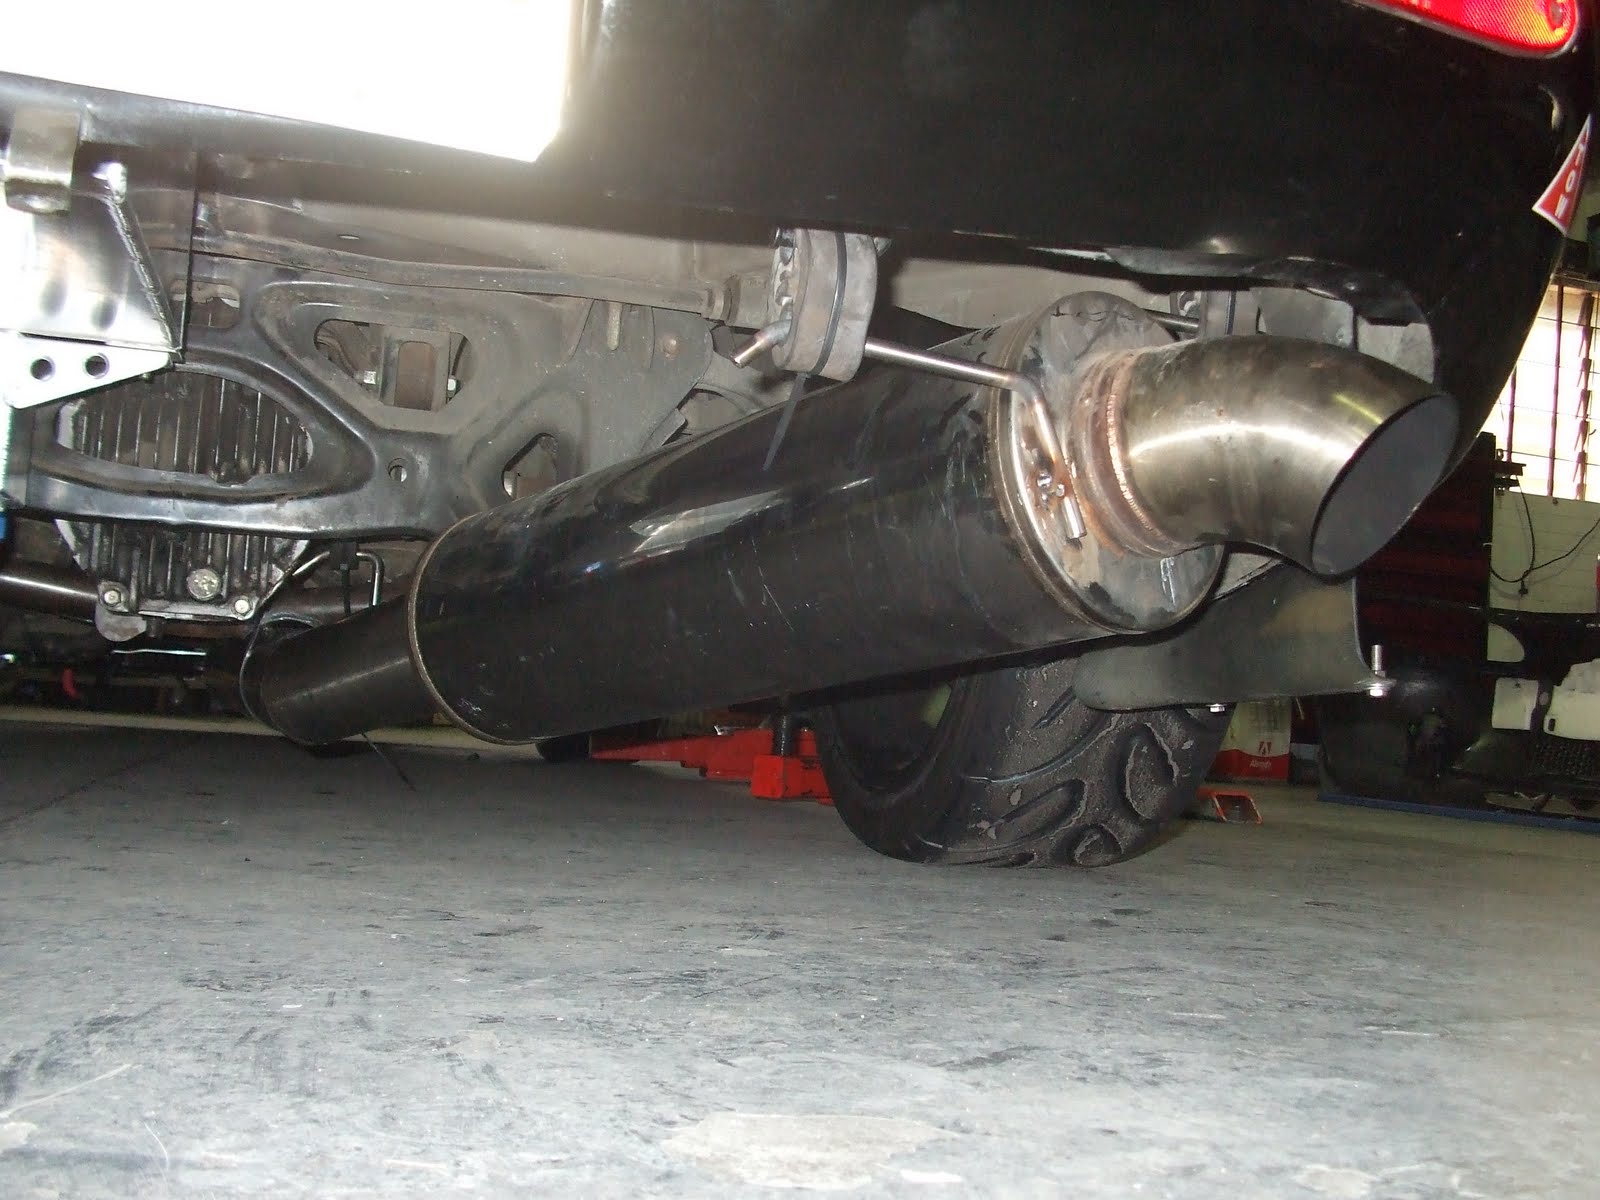 Lightning Rotors: Construction of the 4 inch exhaust